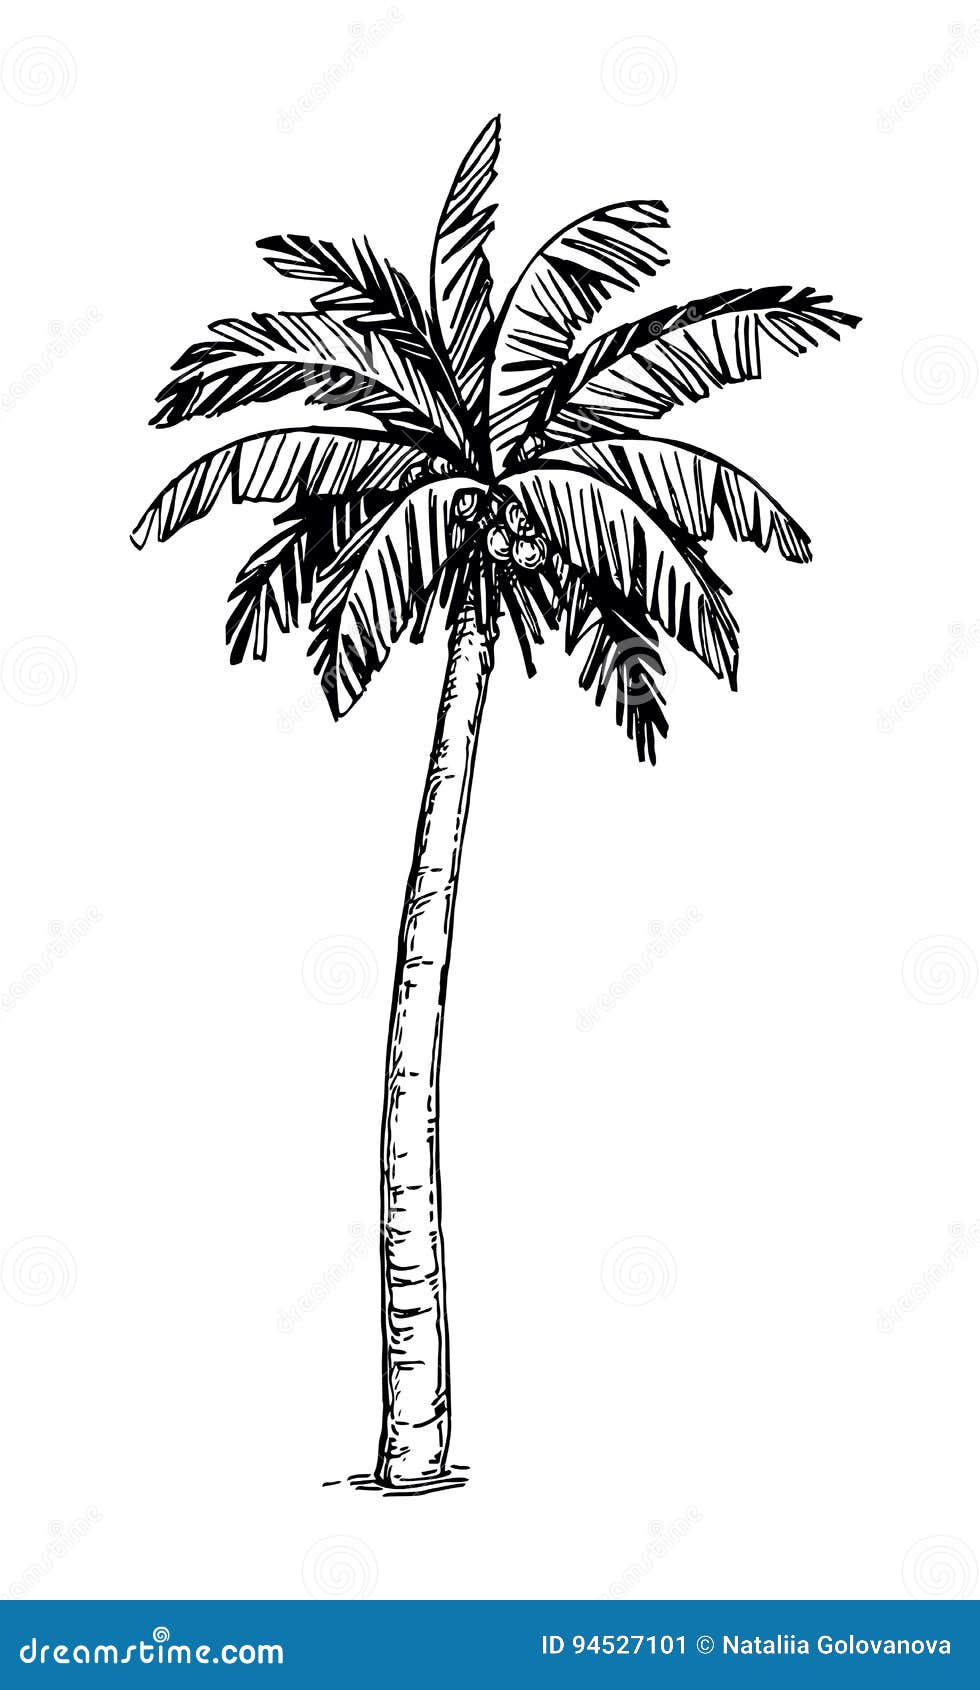 How to Draw a Palm Tree on an Island VIDEO  StepbyStep Pictures